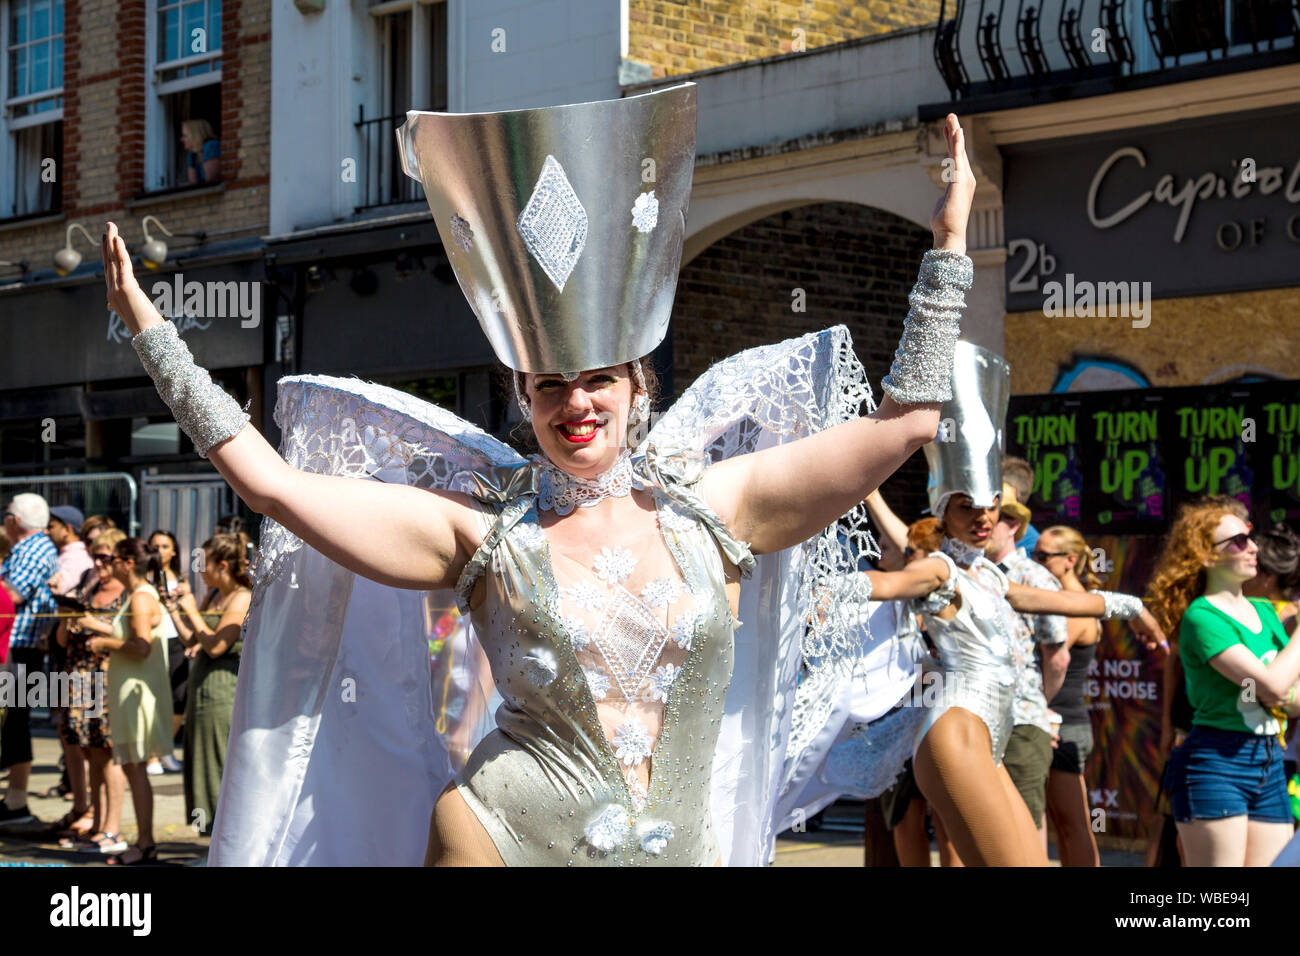 26 August 2019 - Women in a silver costume with headdress at Notting Hill Carnival on a hot Bank Holiday Monday, London, UK Stock Photo